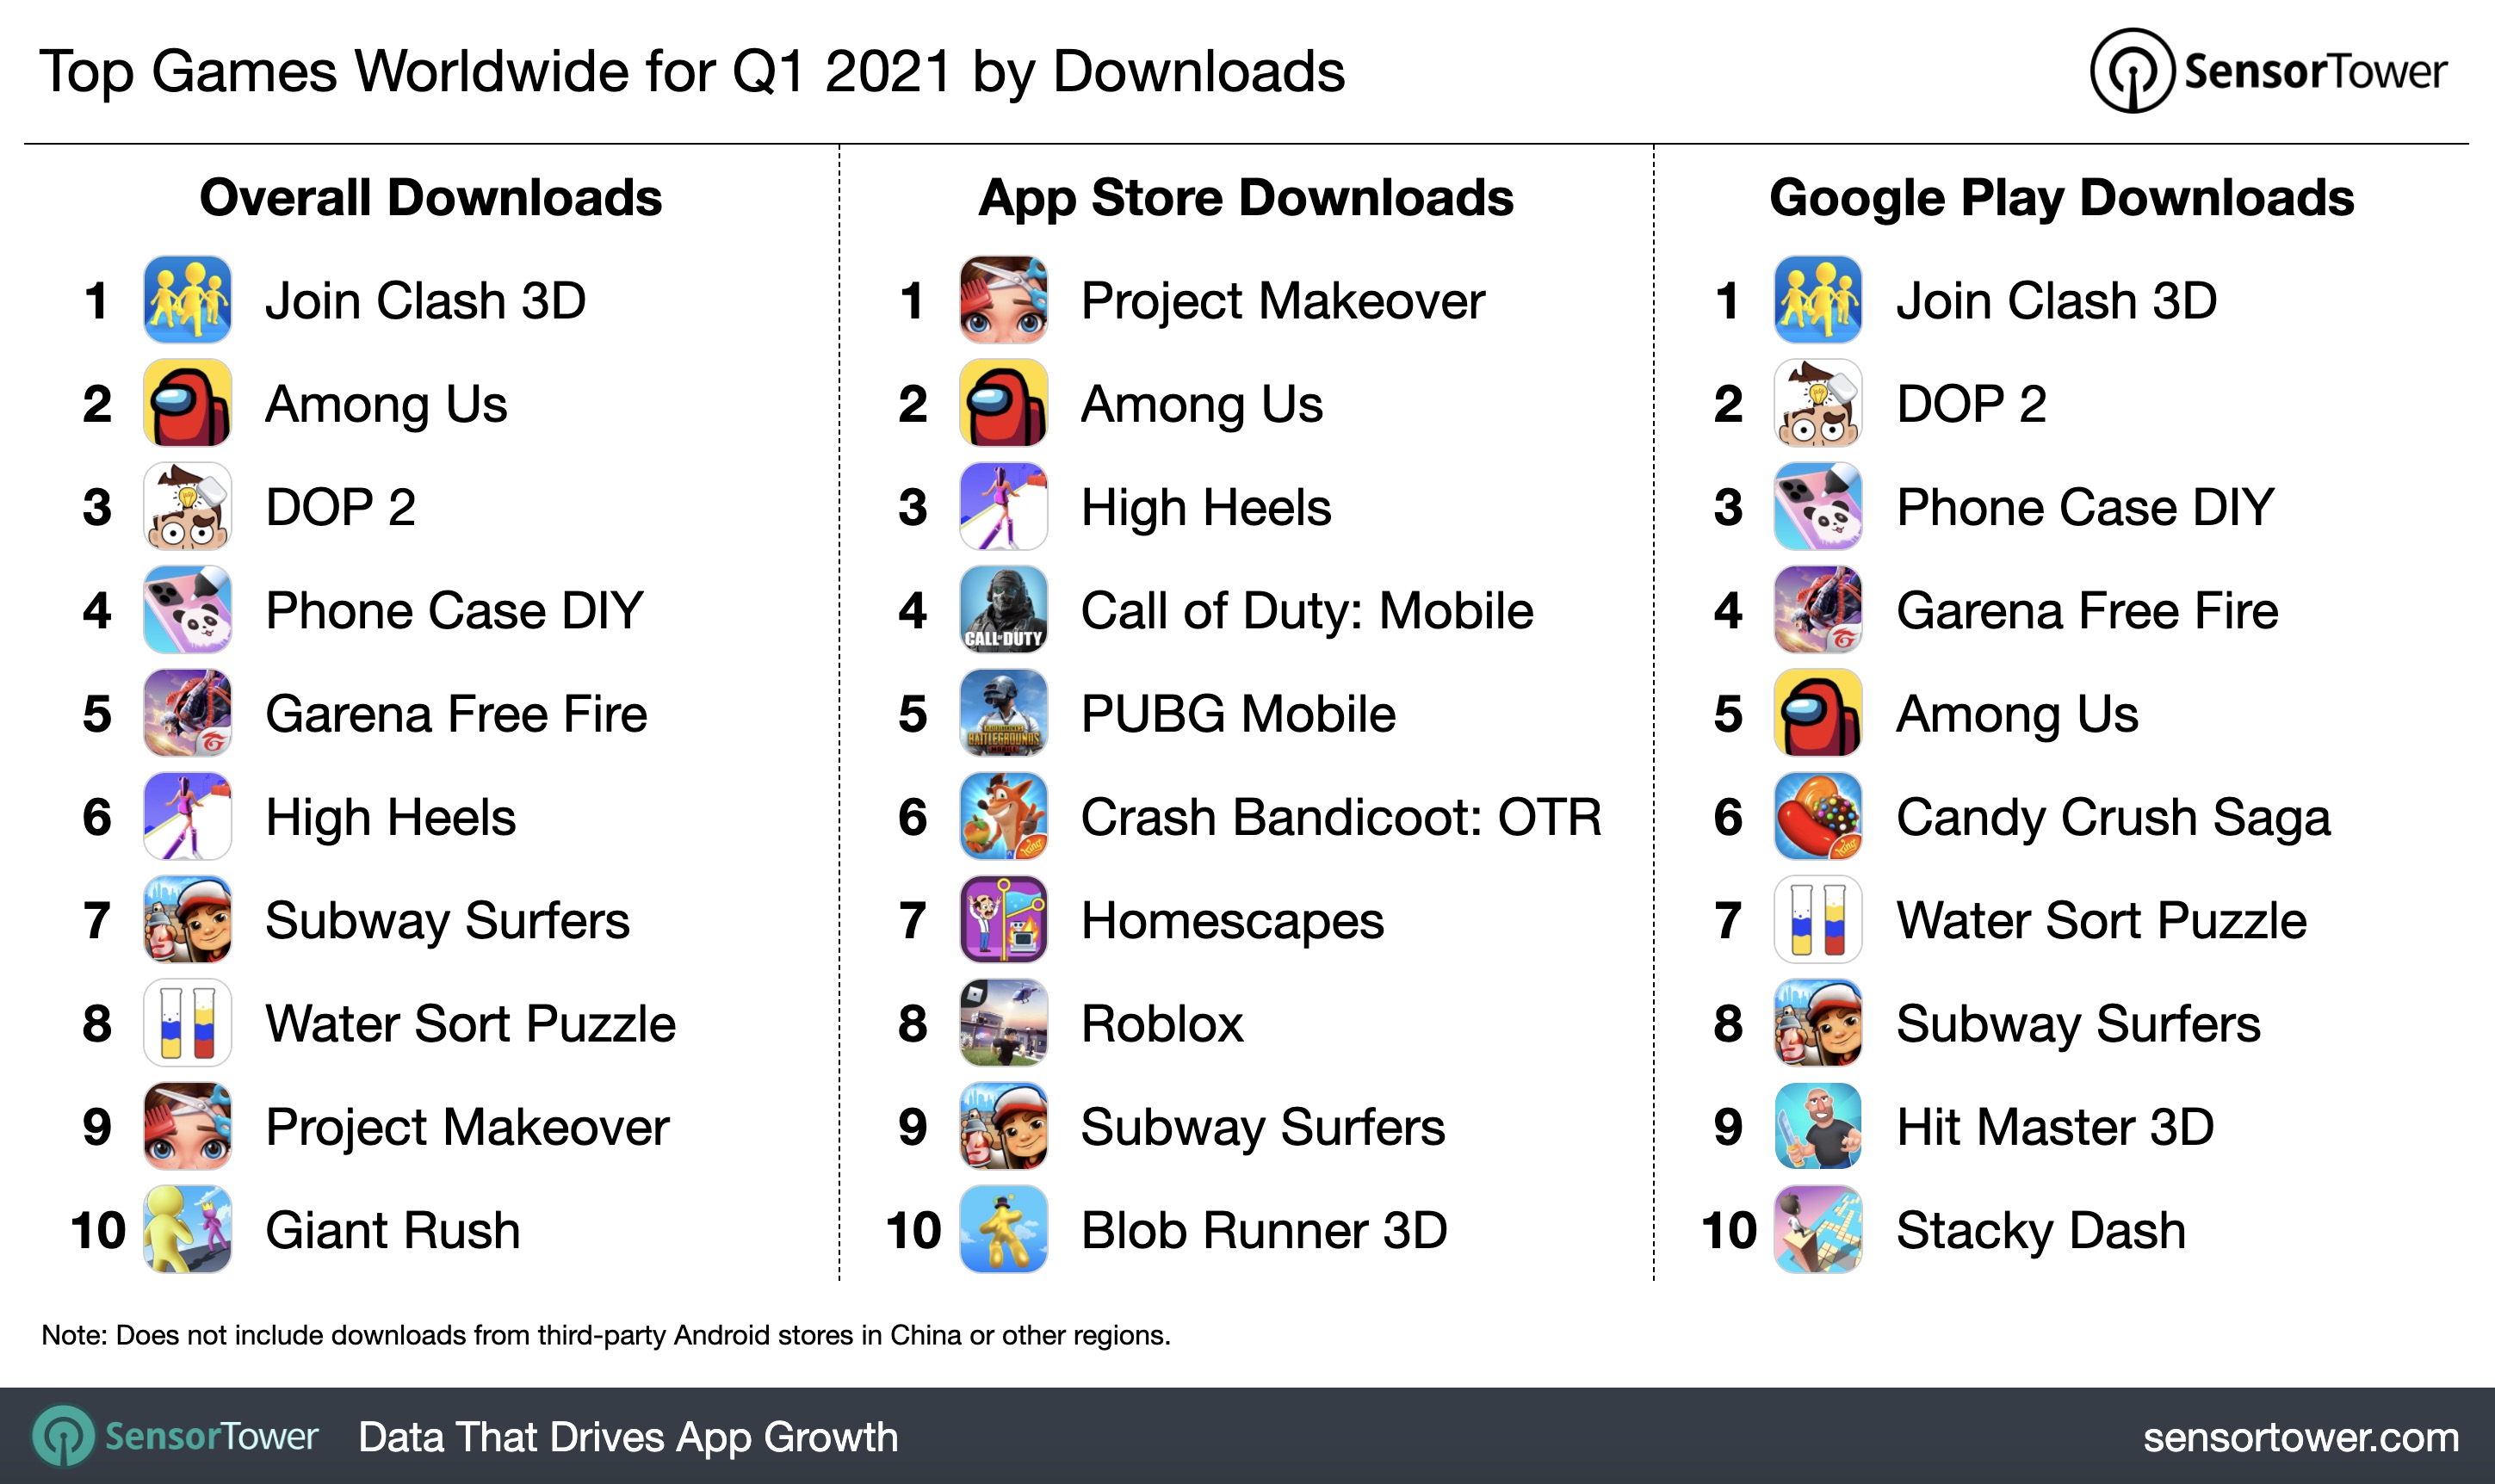 Join Clash 3D was the top downloaded game in 1Q21, followed by Among Us and Phone Case DIY.